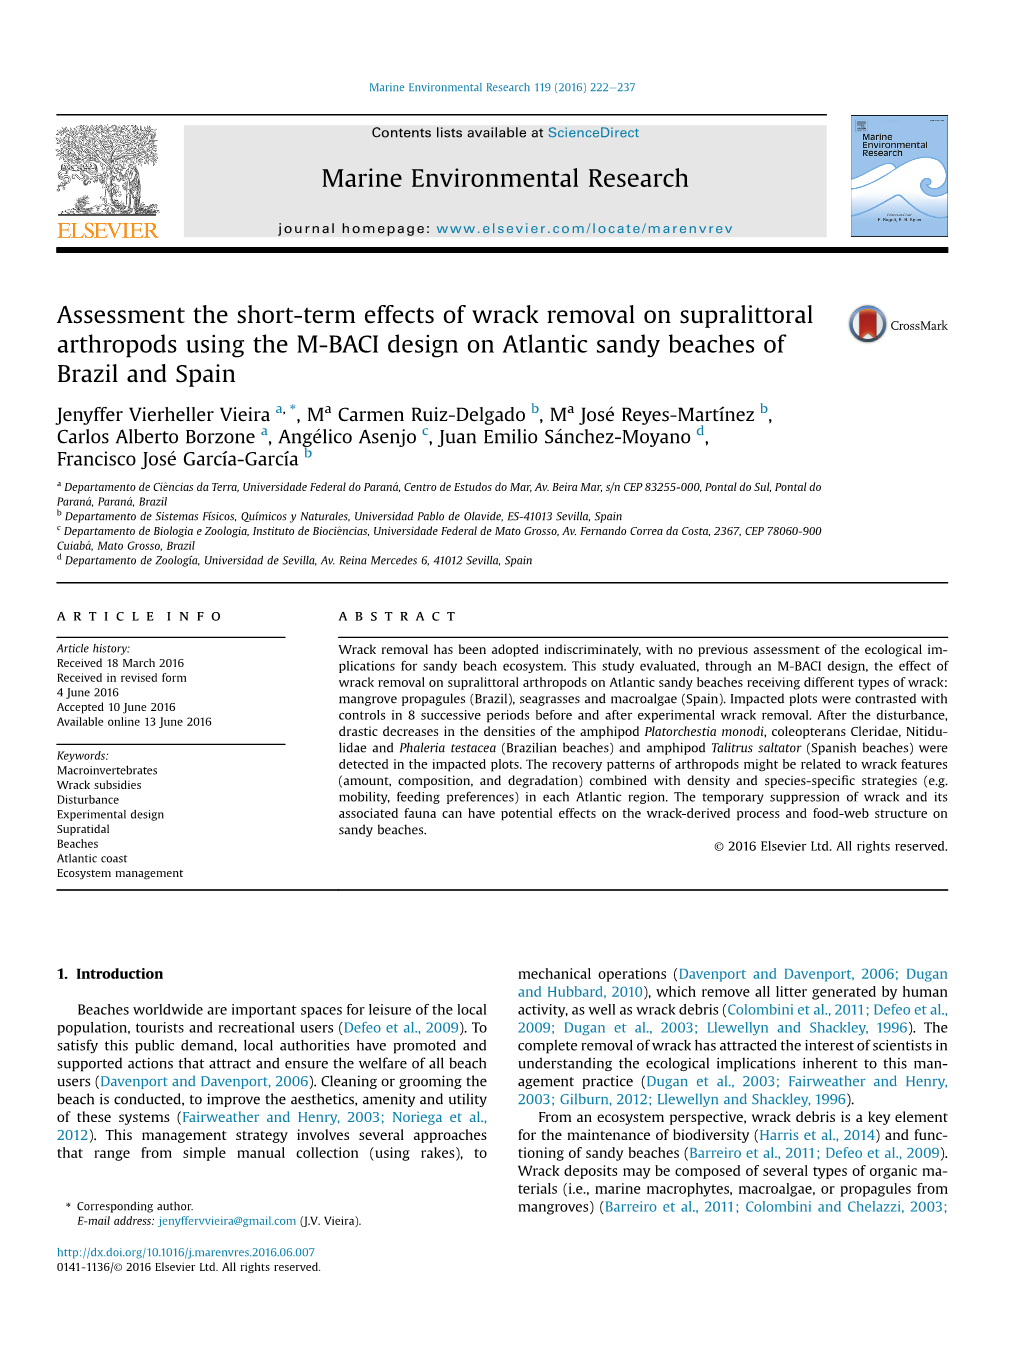 Assessment the Short-Term Effects of Wrack Removal on Supralittoral Arthropods Using the M-BACI Design on Atlantic Sandy Beaches of Brazil and Spain